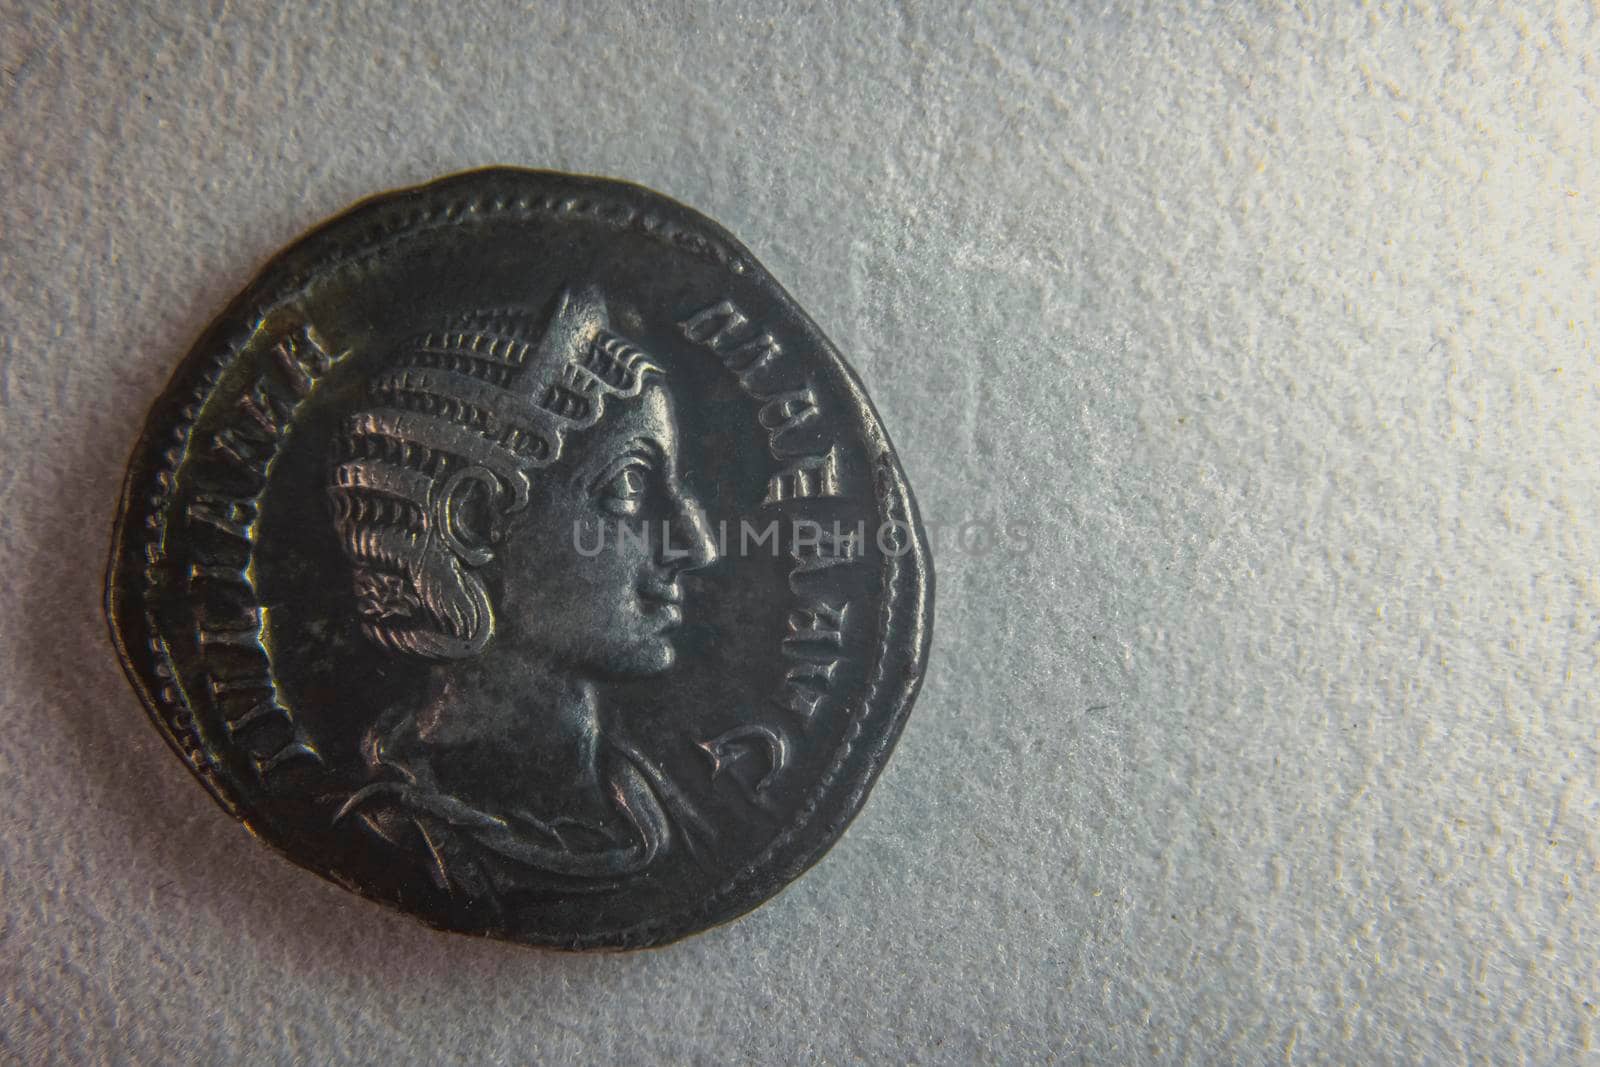 old roman coin on white paper closeup